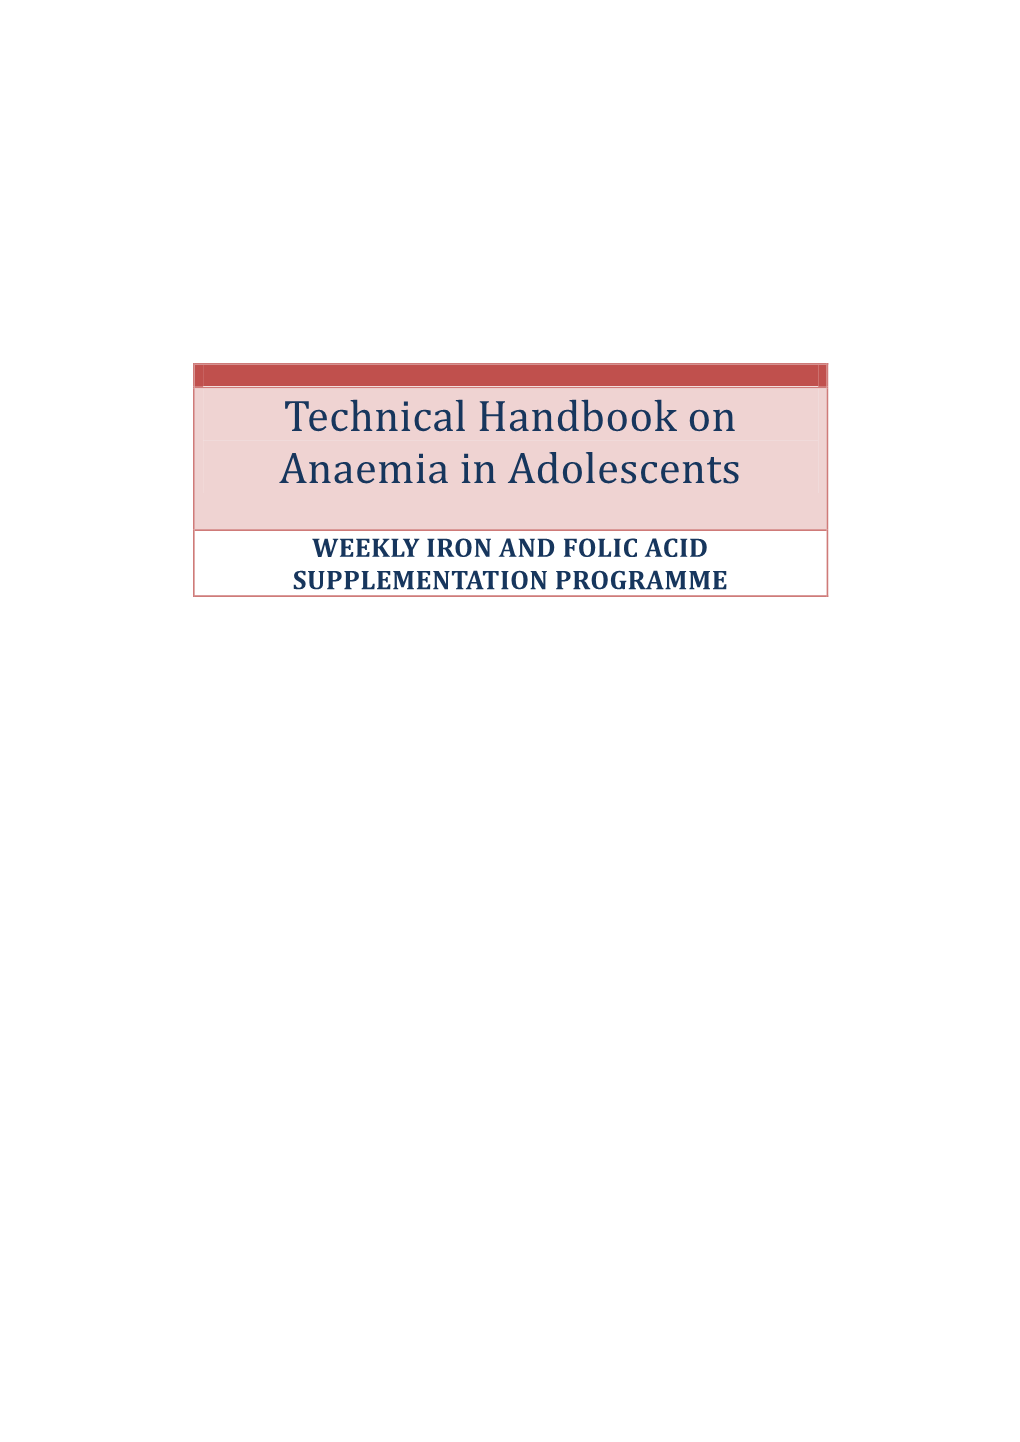 Technical Handbook on Anaemia in Adolescents